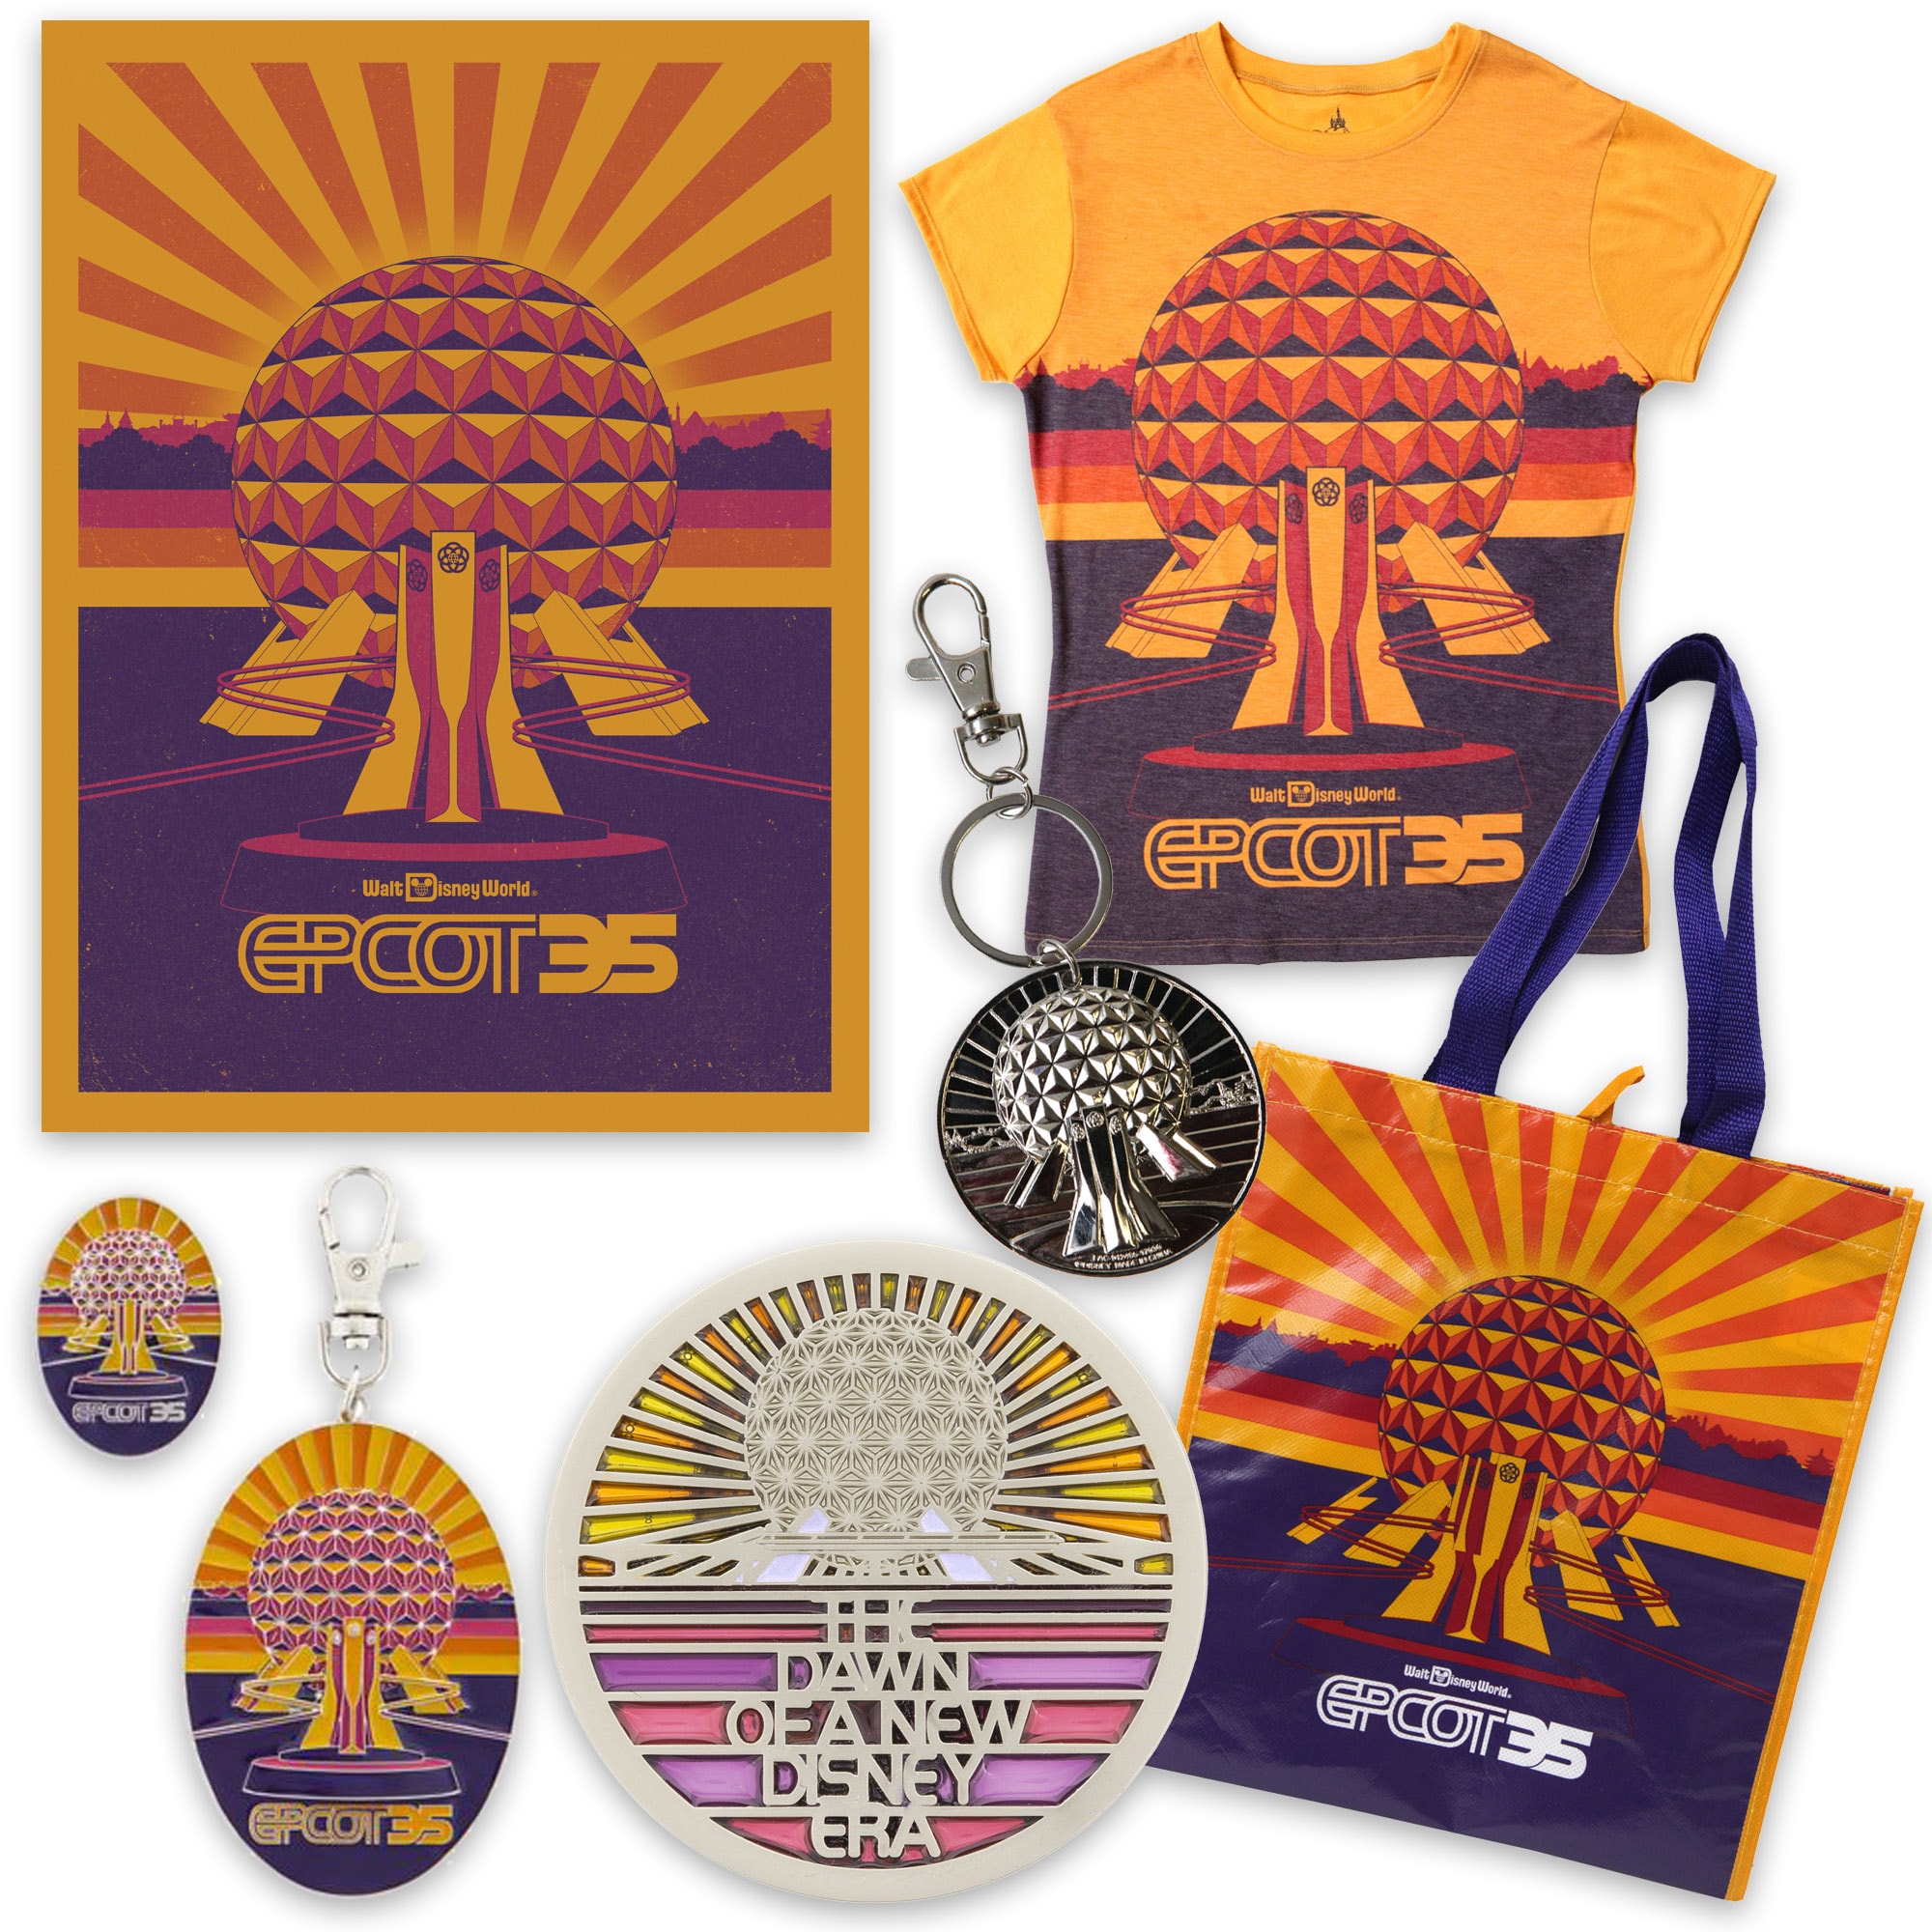 Merchandise for 35th Anniversary of Epcot